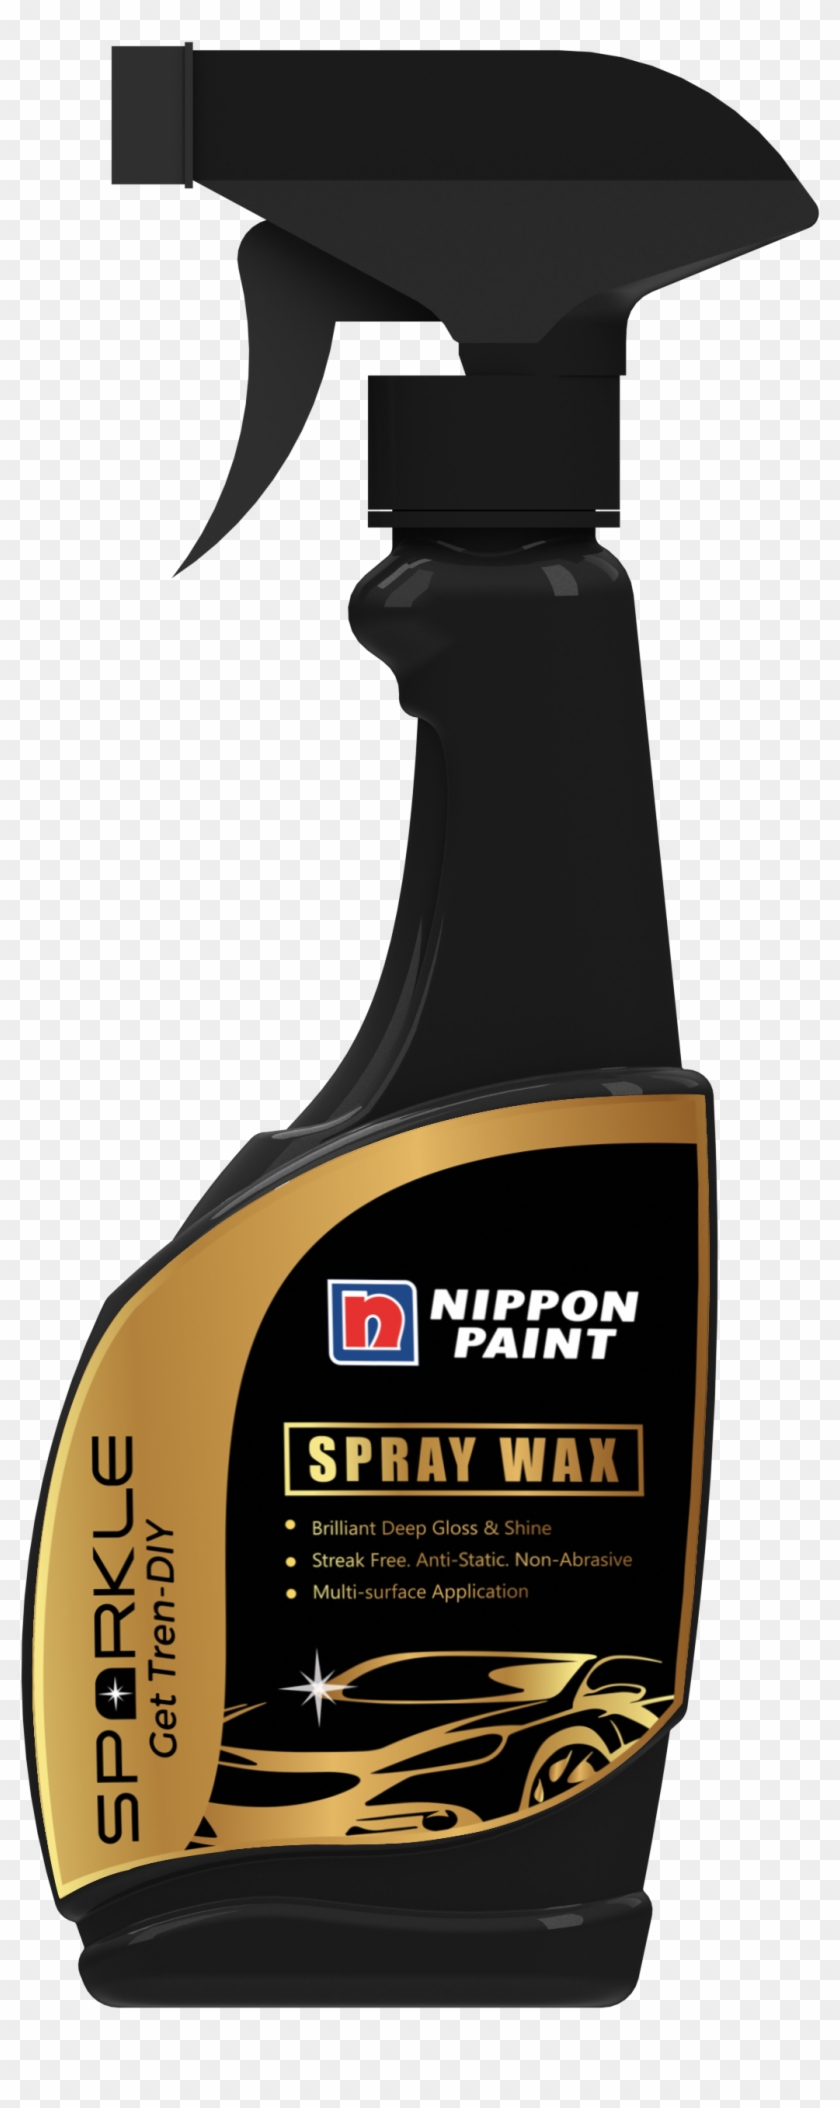 Premium Fast Spray Wax Gives A High Shine Formula And - Nippon Paint Clipart #3326222